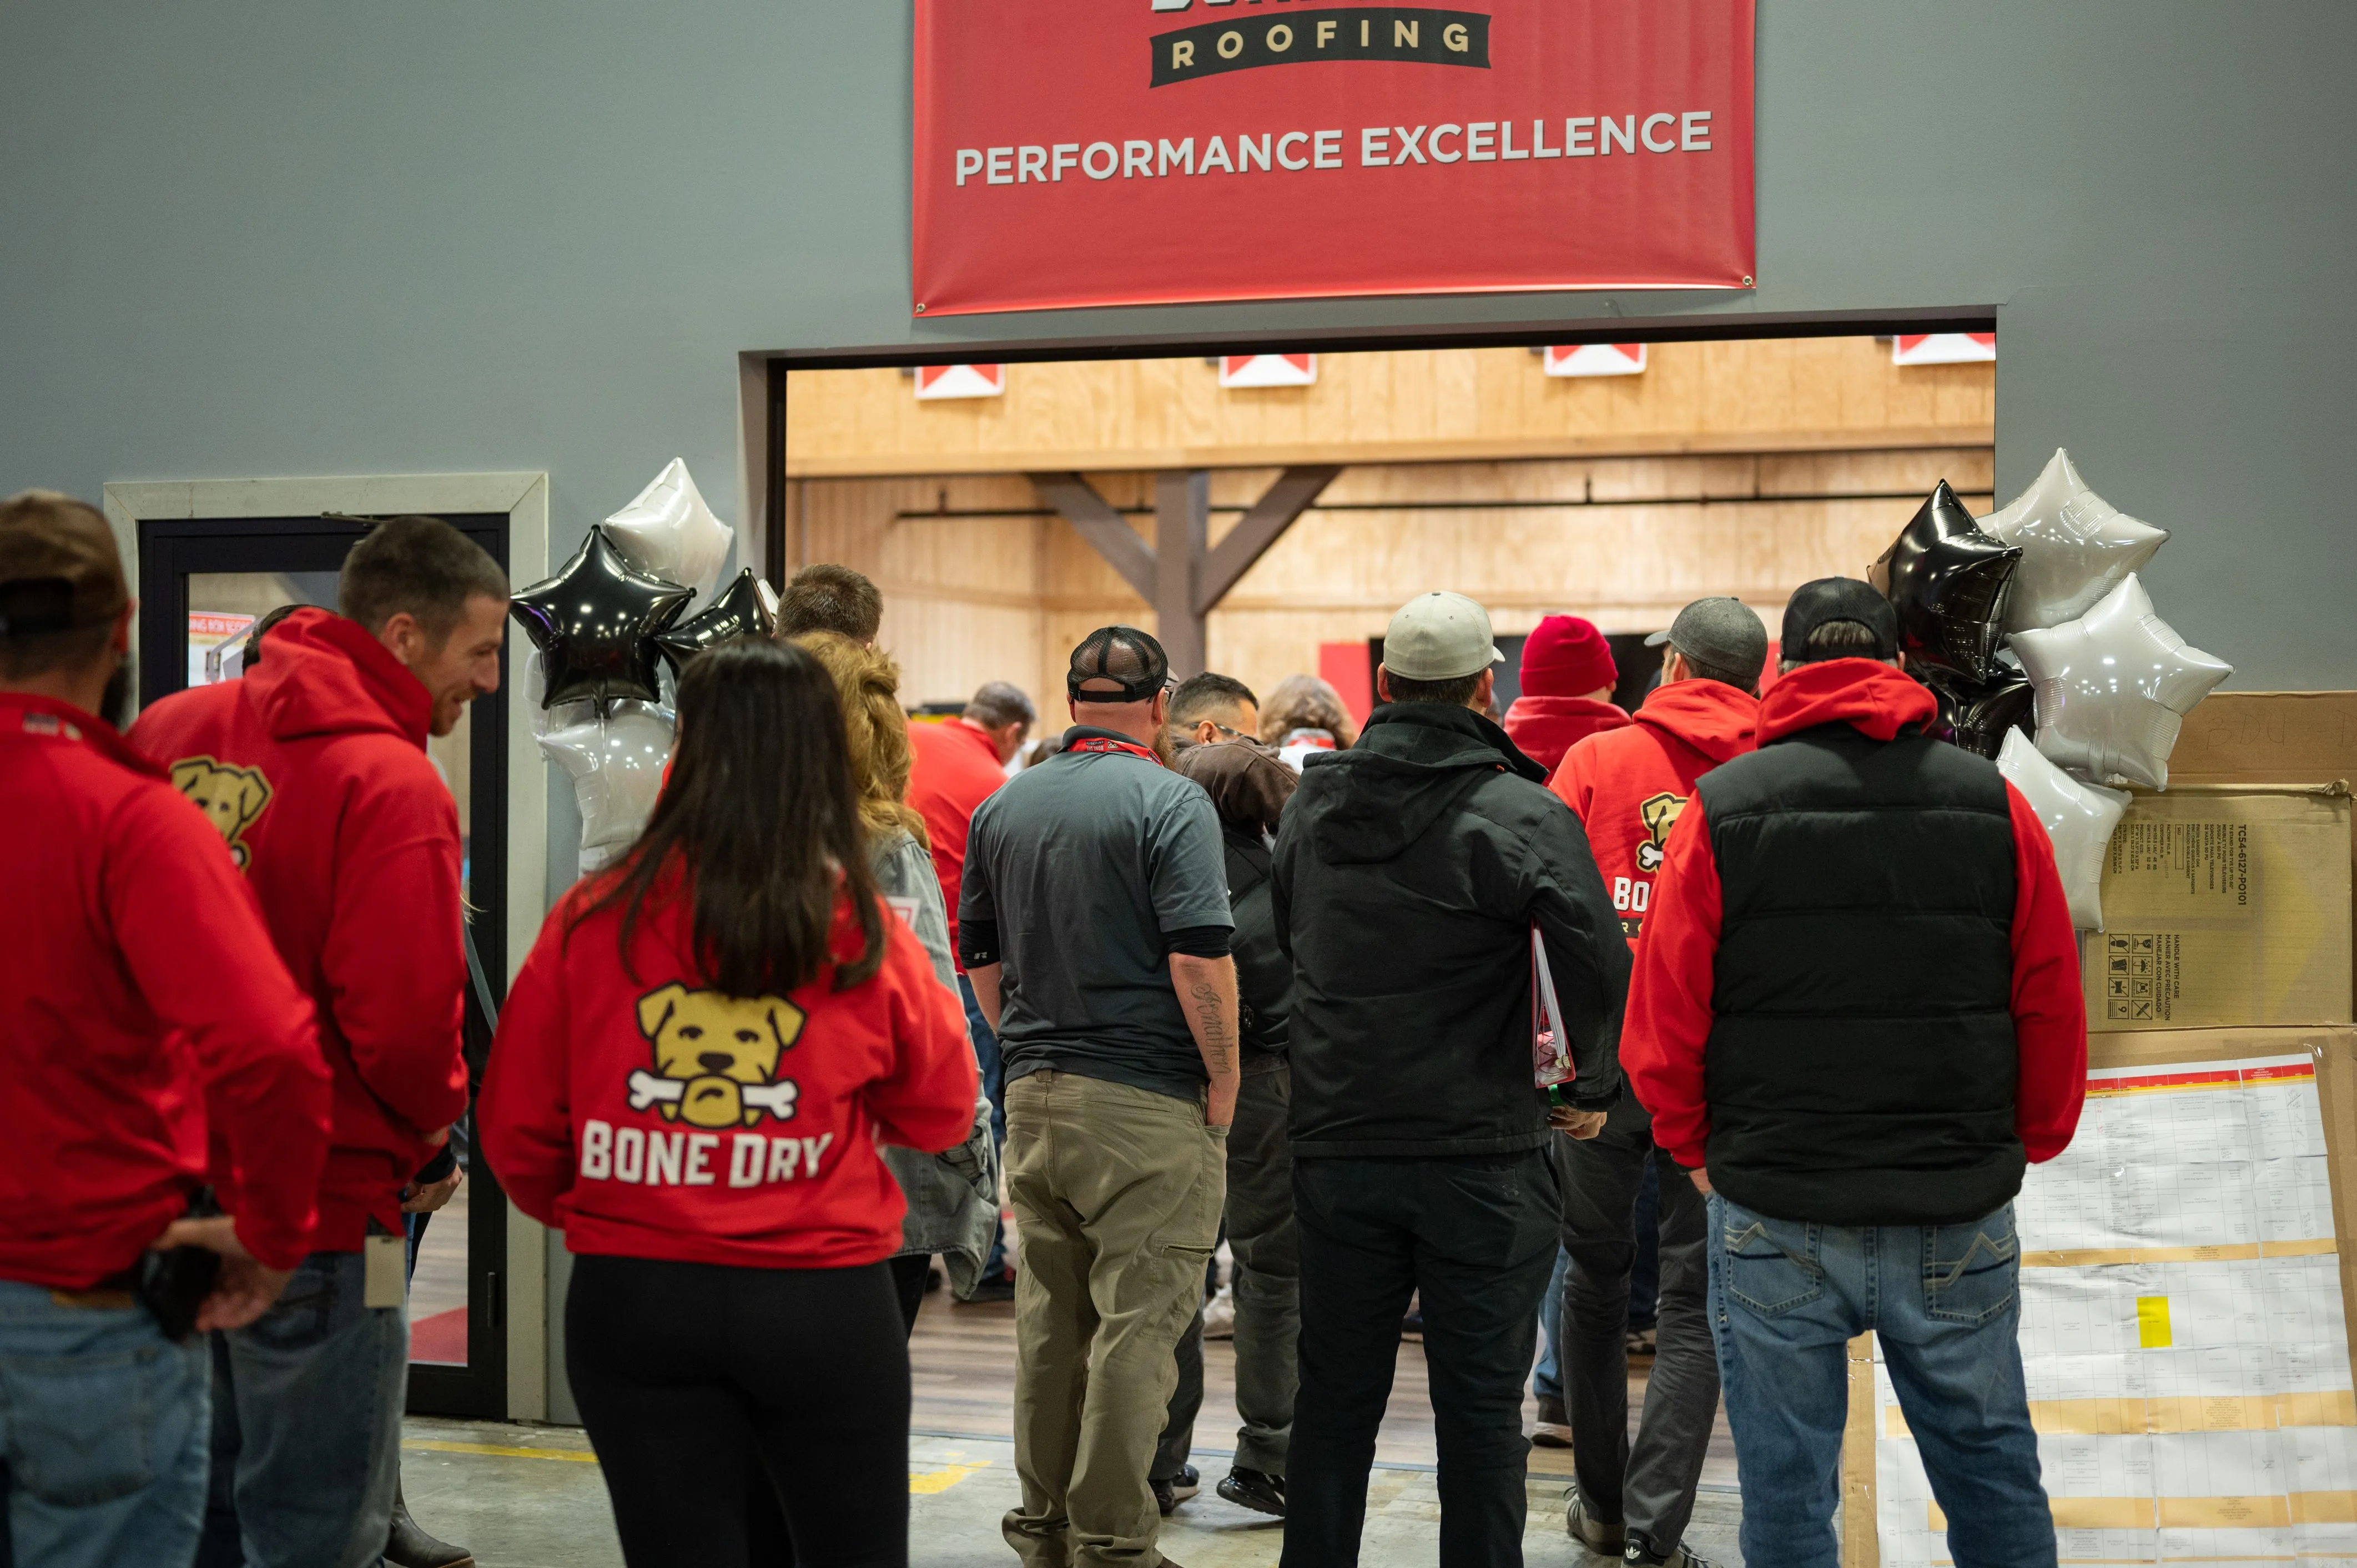 Group of people wearing red attending a trade show booth with a sign reading 'Performance Excellence.'